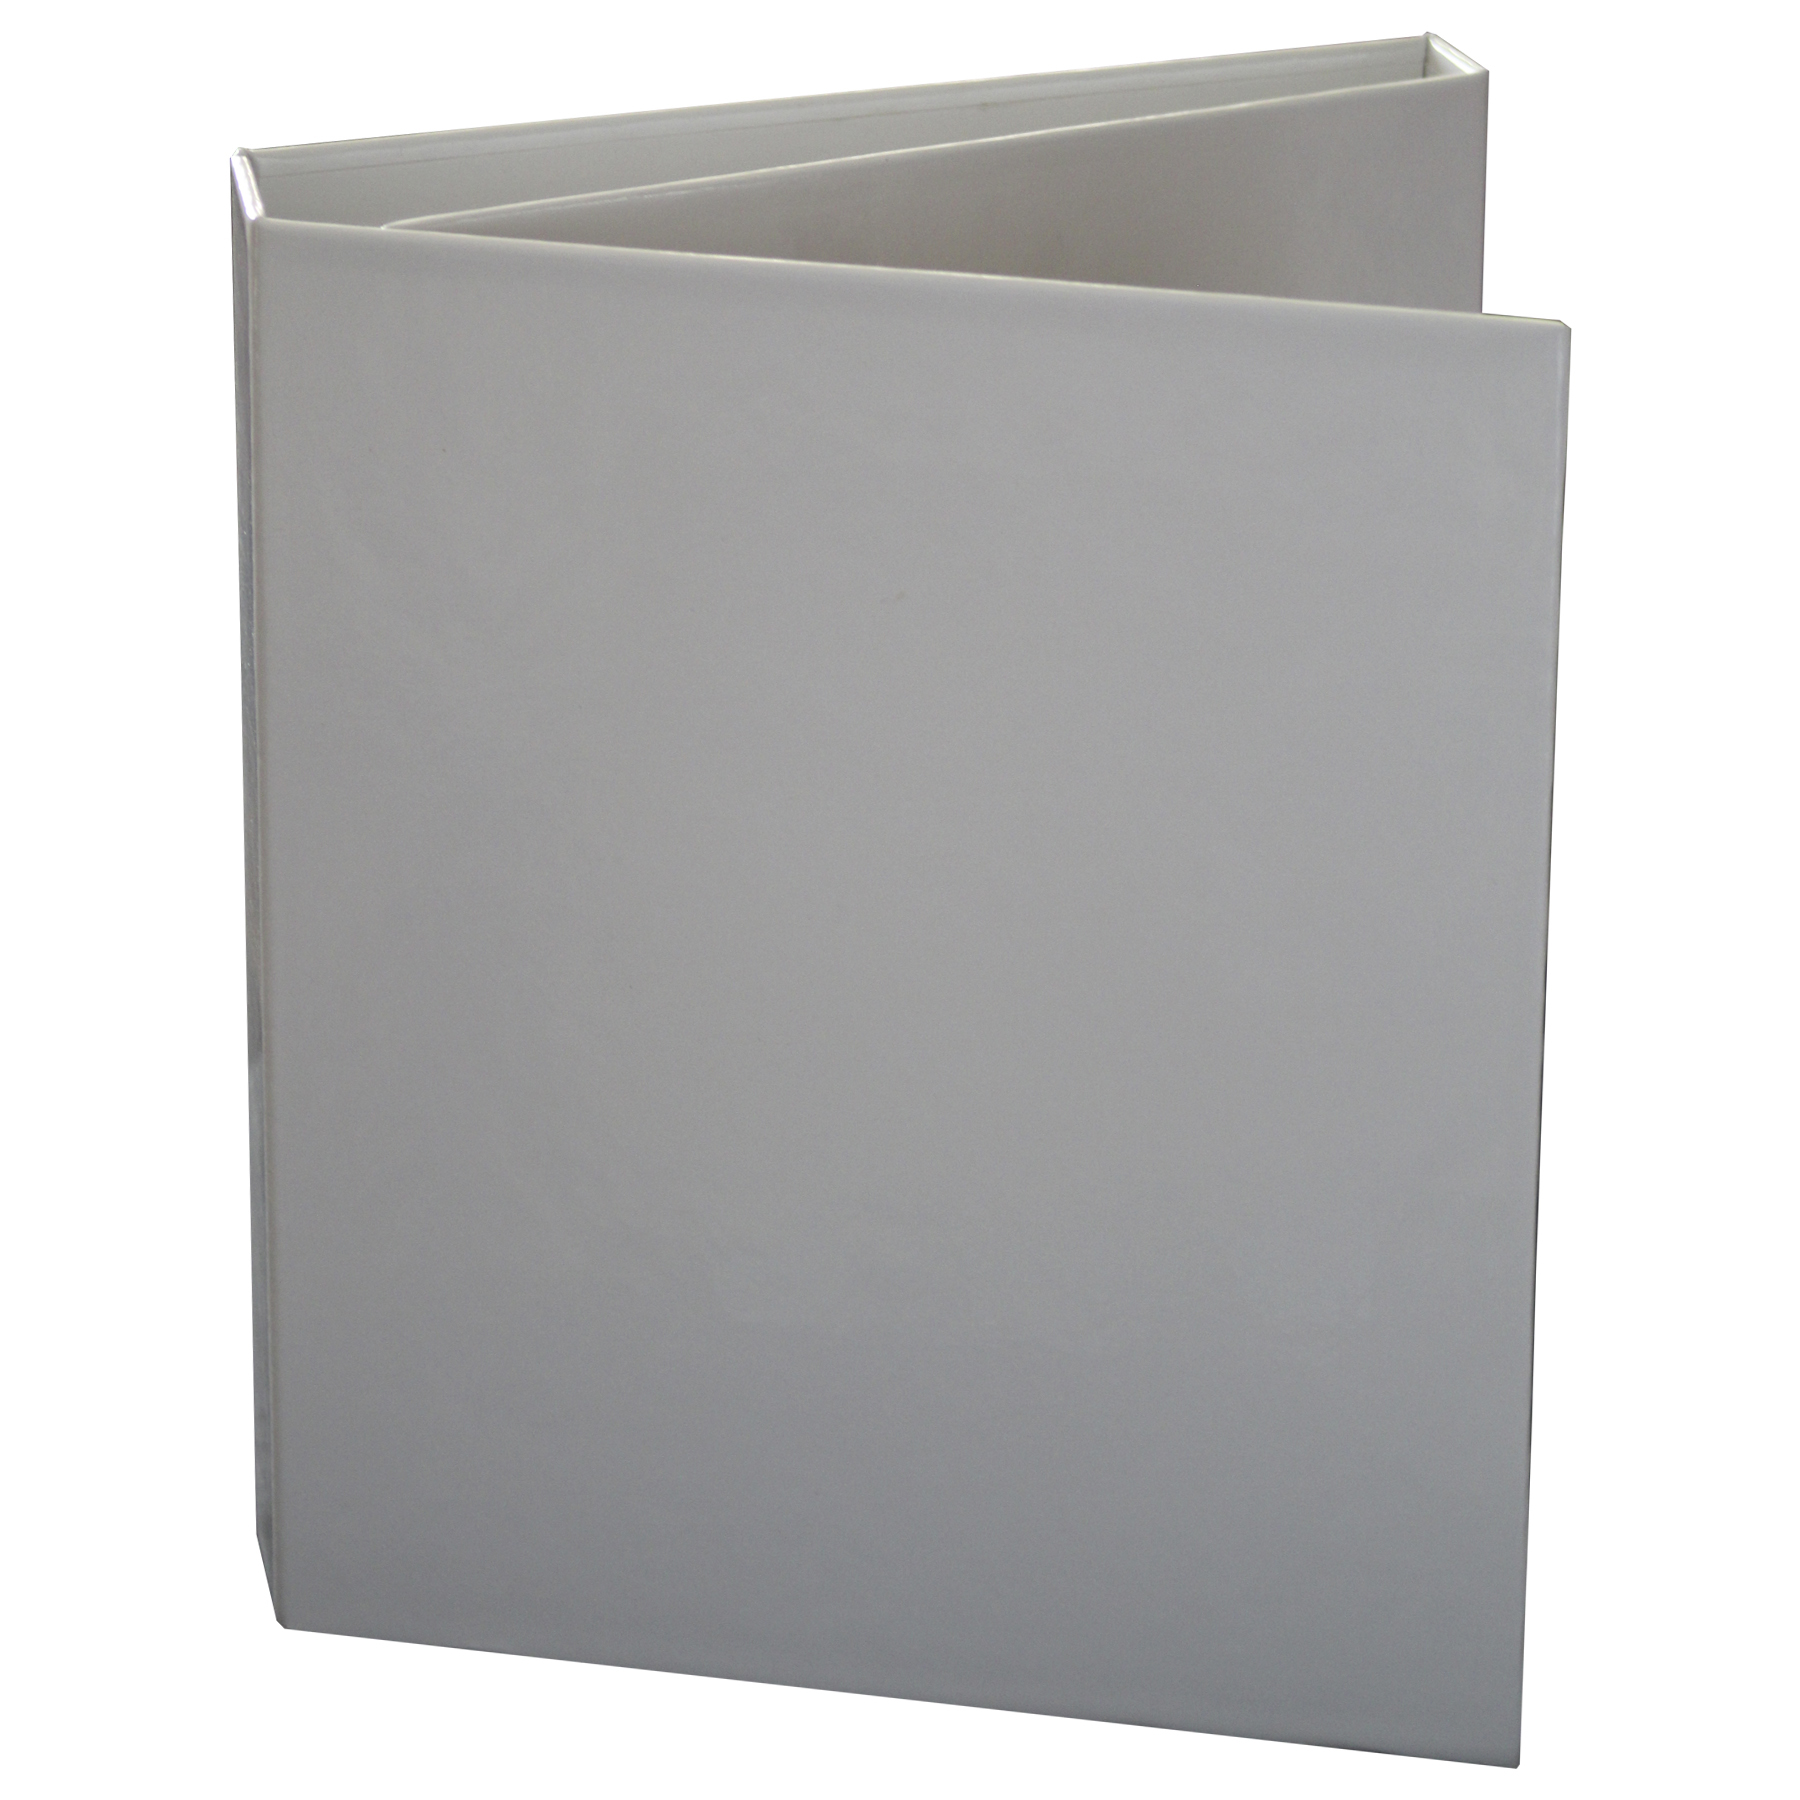 Blank Architectural Binder for Flooring Sample Presentation Many Styles Available Customize with Logo